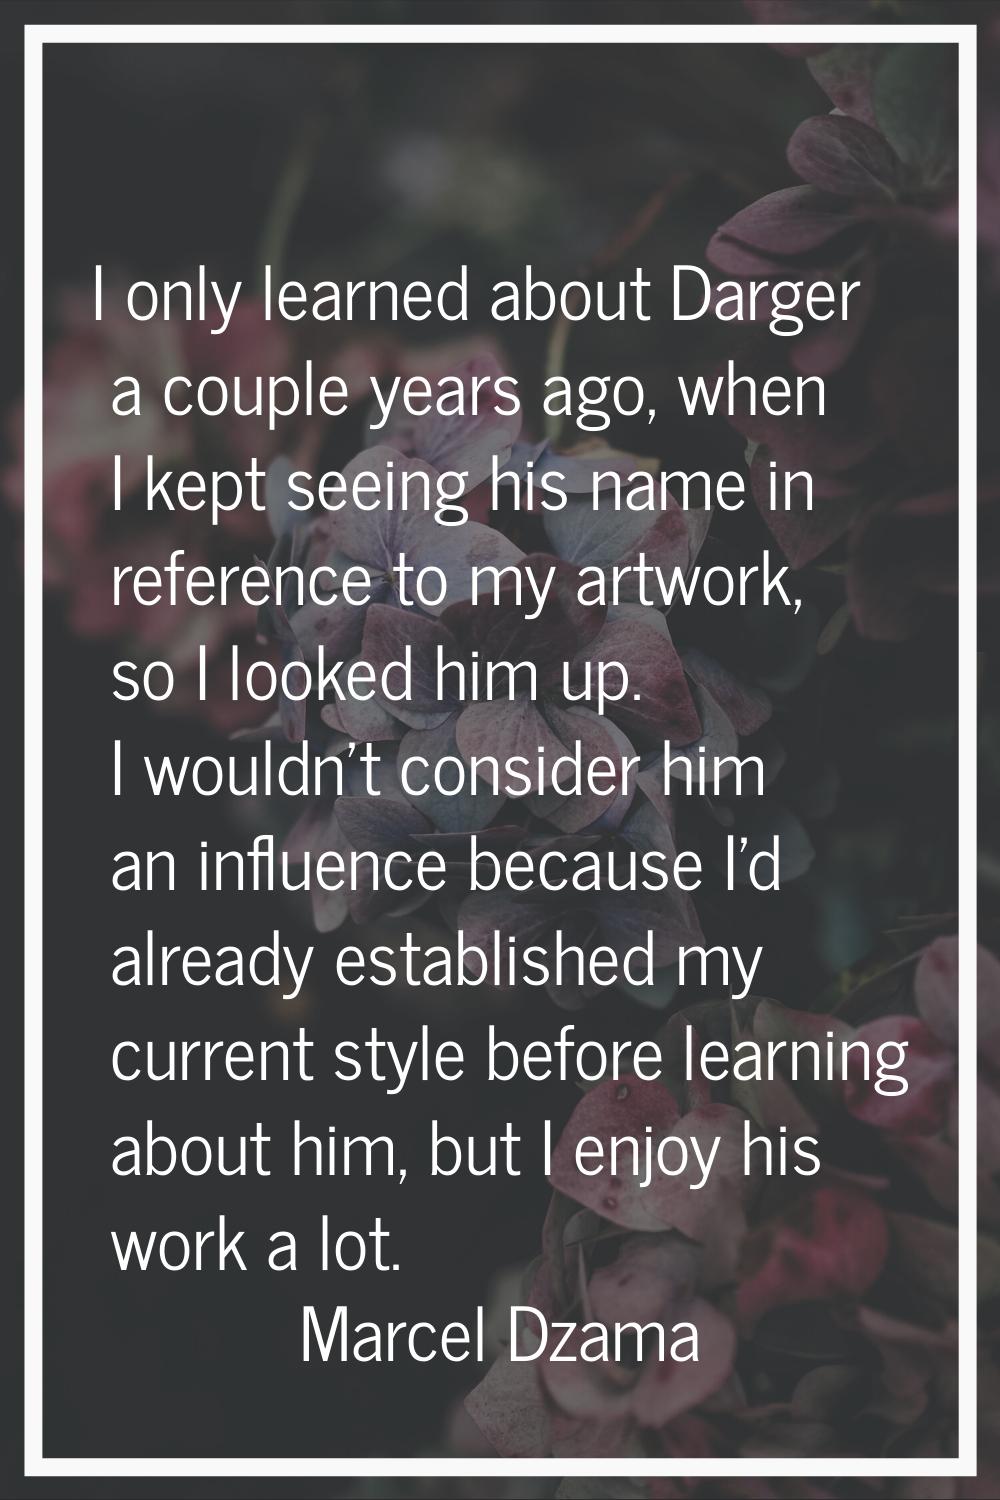 I only learned about Darger a couple years ago, when I kept seeing his name in reference to my artw